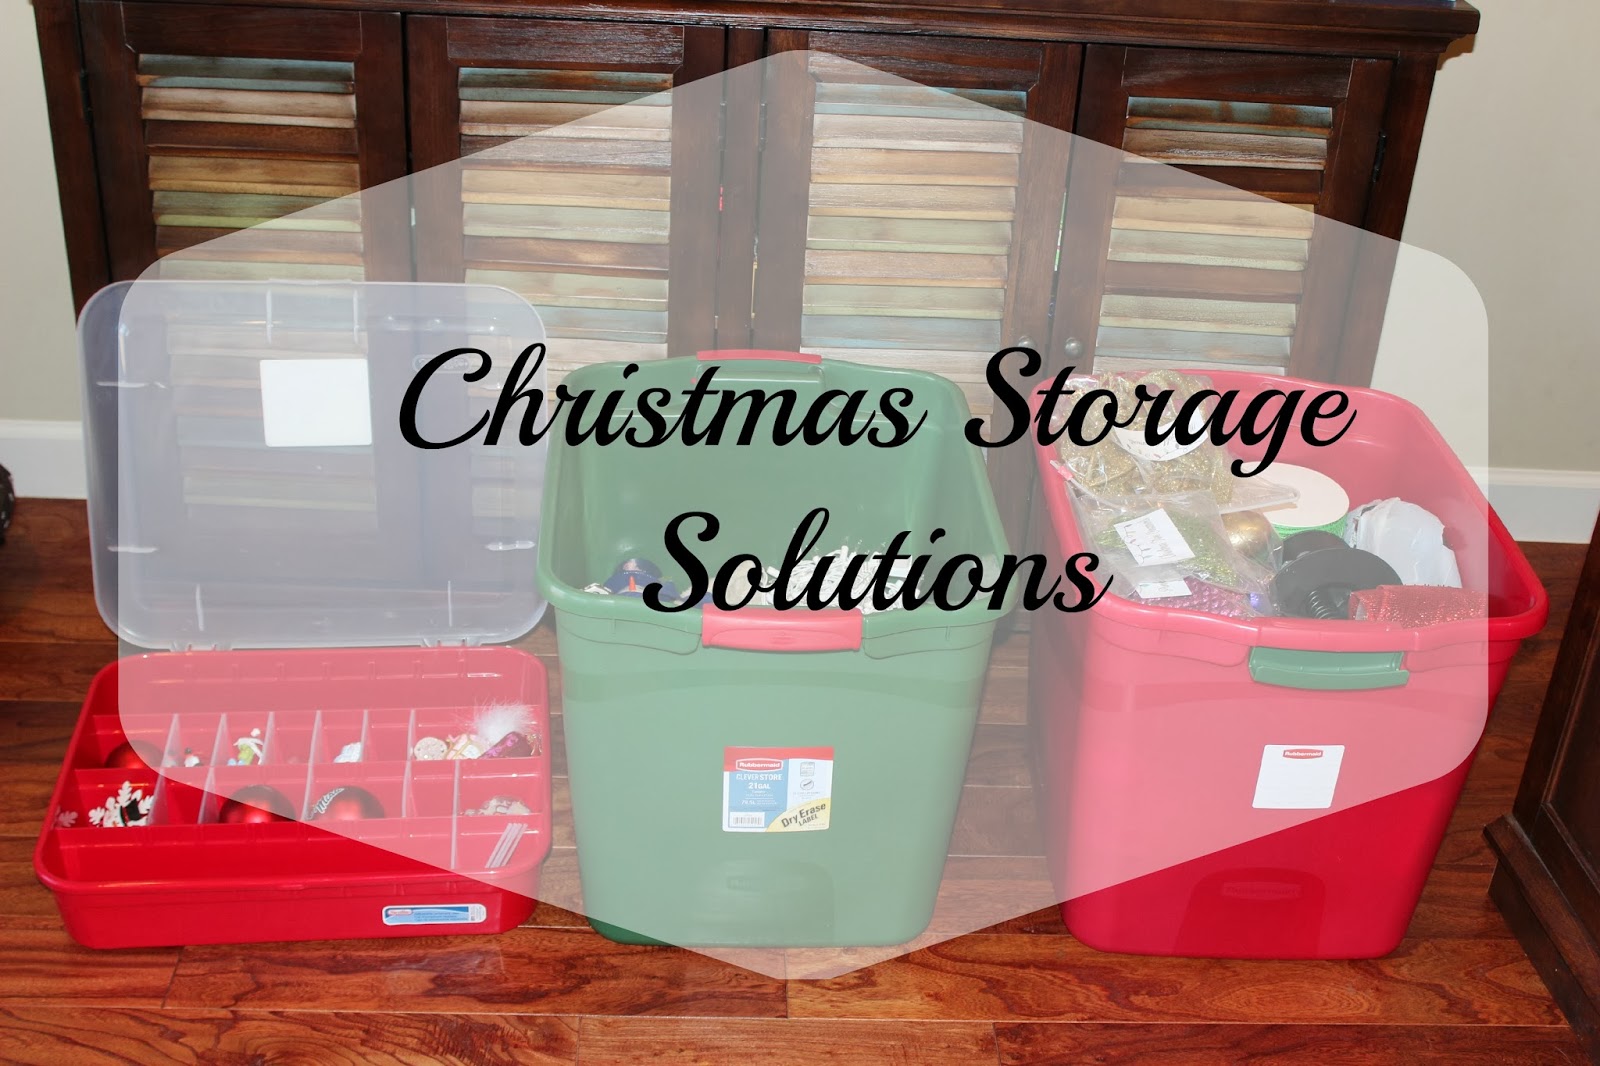  Christmas Storage Solutions